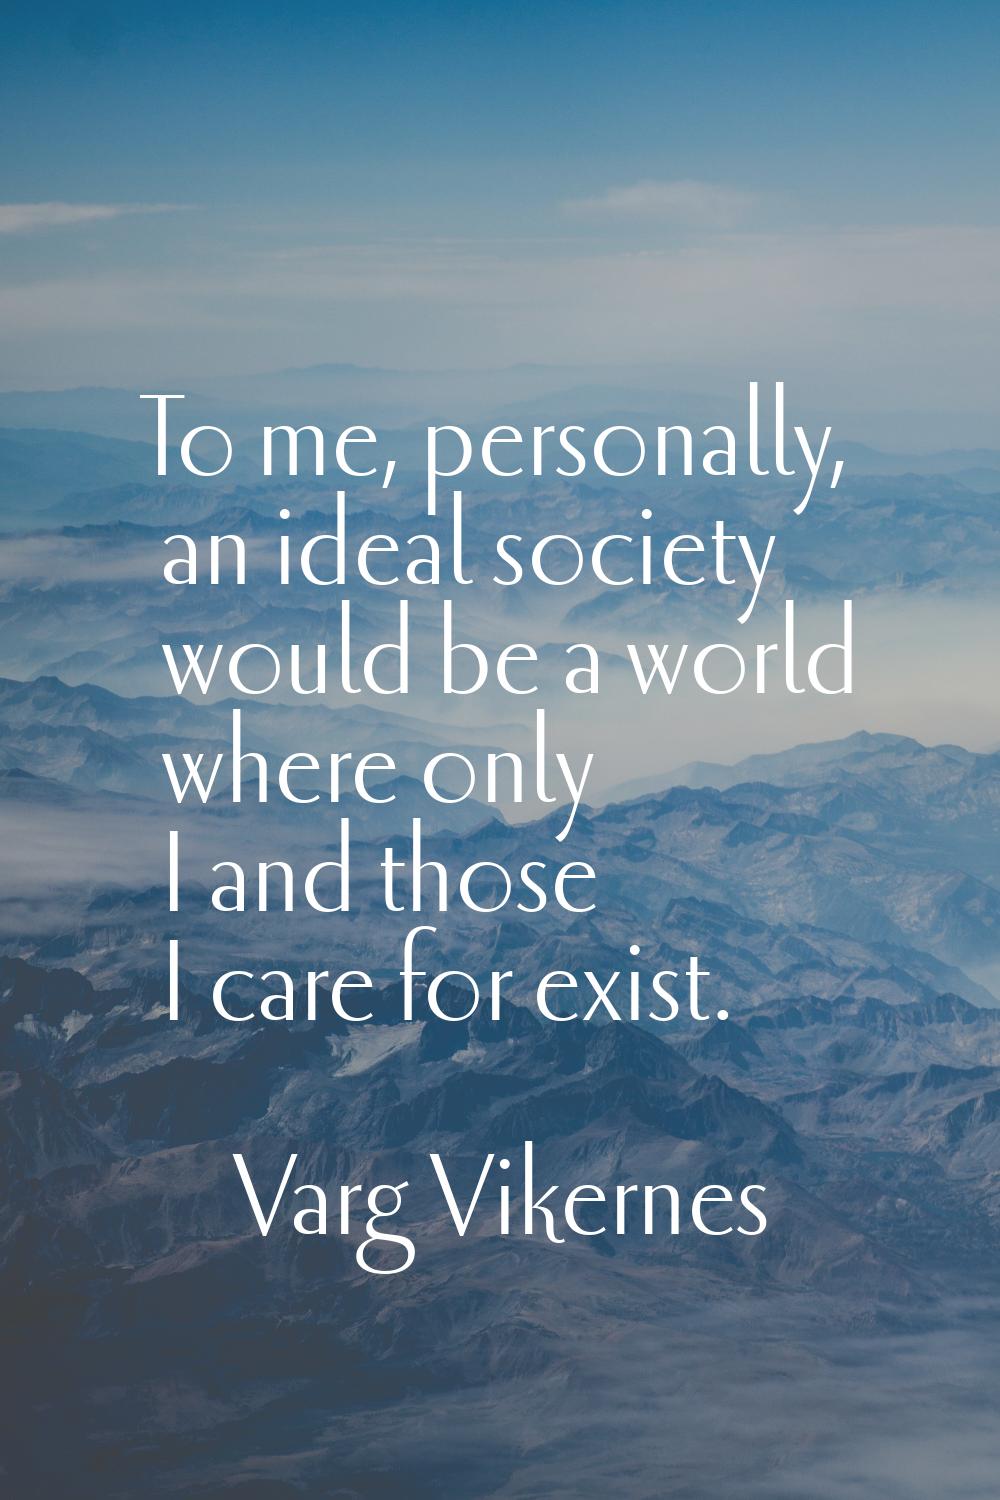 To me, personally, an ideal society would be a world where only I and those I care for exist.